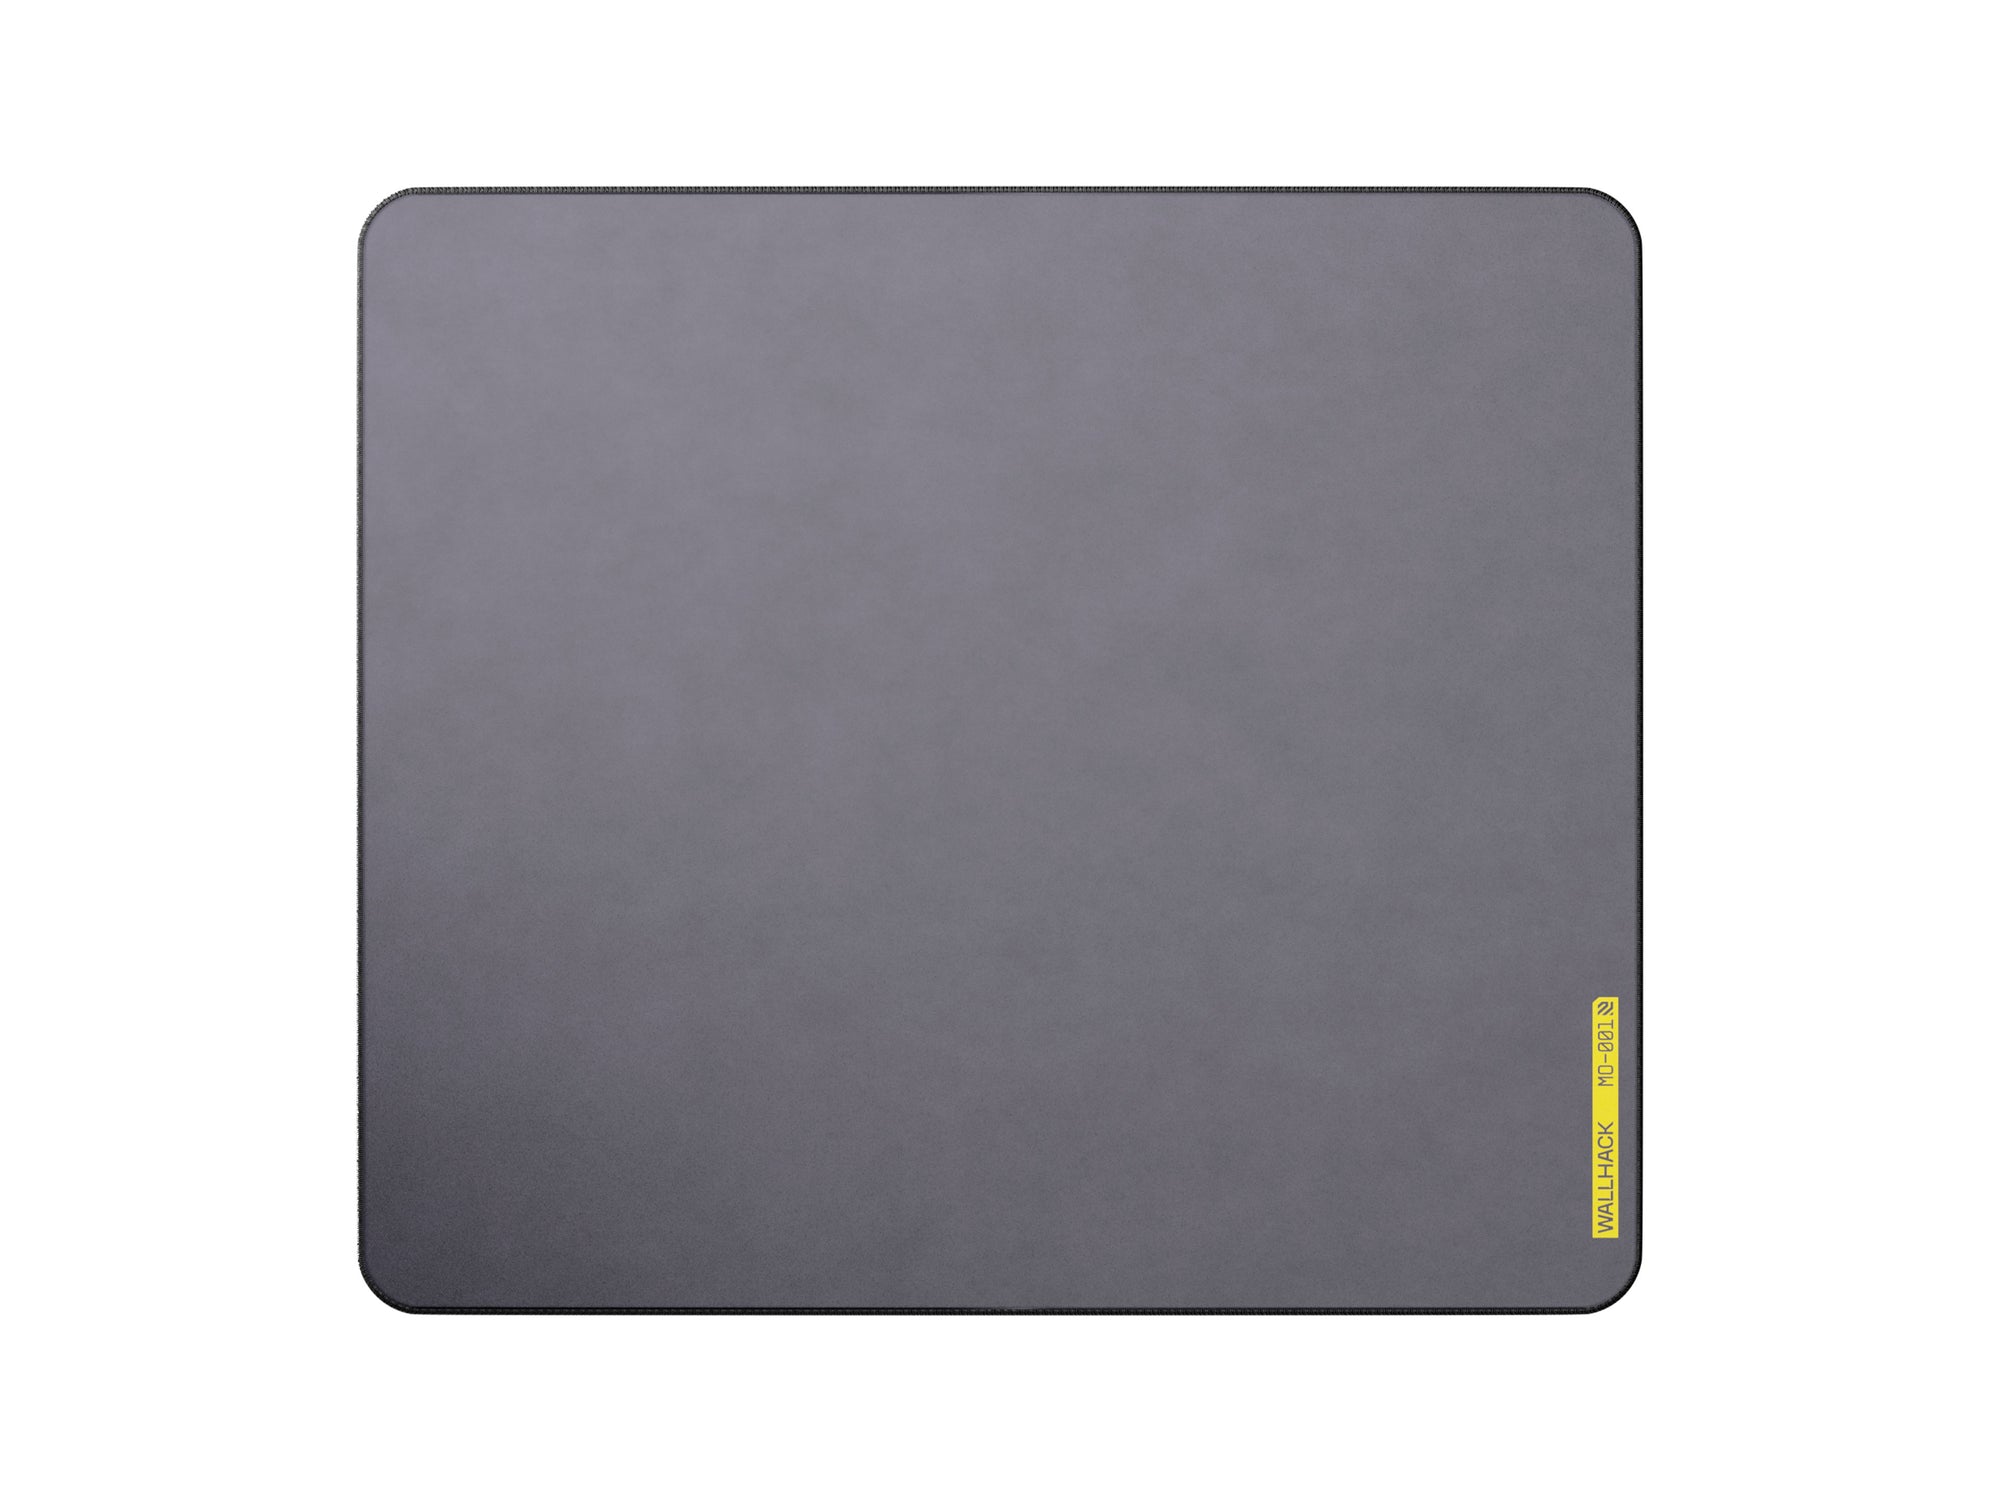 Black colored WALLHACK MO-001 Mouse Pad from the front angle with a yellow logo